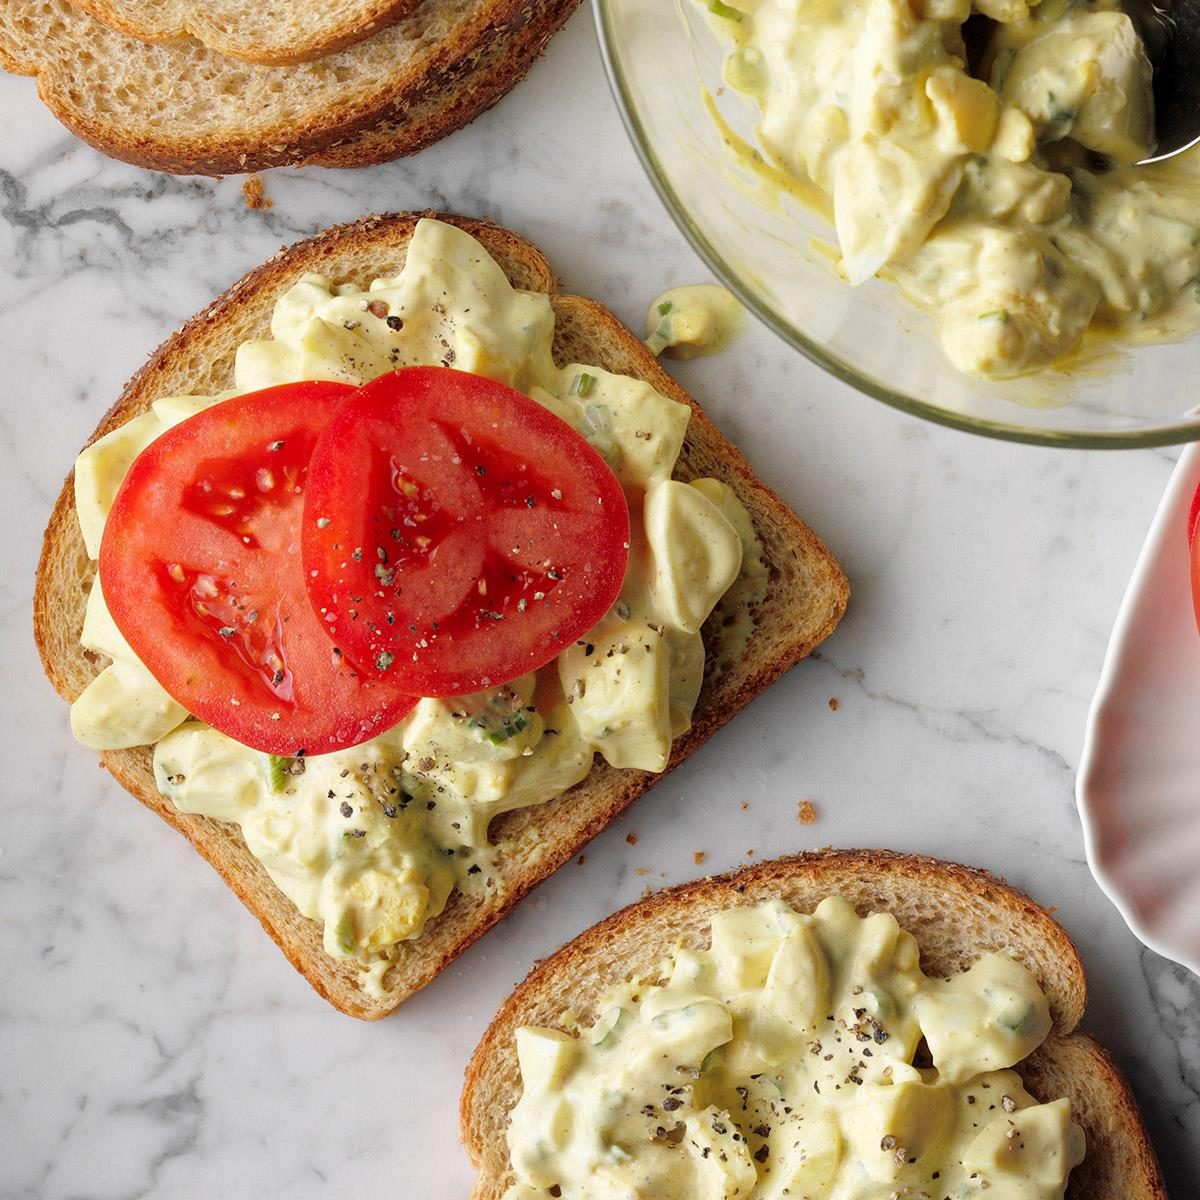 <p>A curry kick gives this egg salad big appeal. We love it when the weather gets warm. —Joyce McDowell, West Union, Ohio</p> <div class="listicle-page__buttons"> <div class="listicle-page__cta-button"><a href='https://www.tasteofhome.com/recipes/curried-egg-salad/'>Get Recipe</a></div> </div>